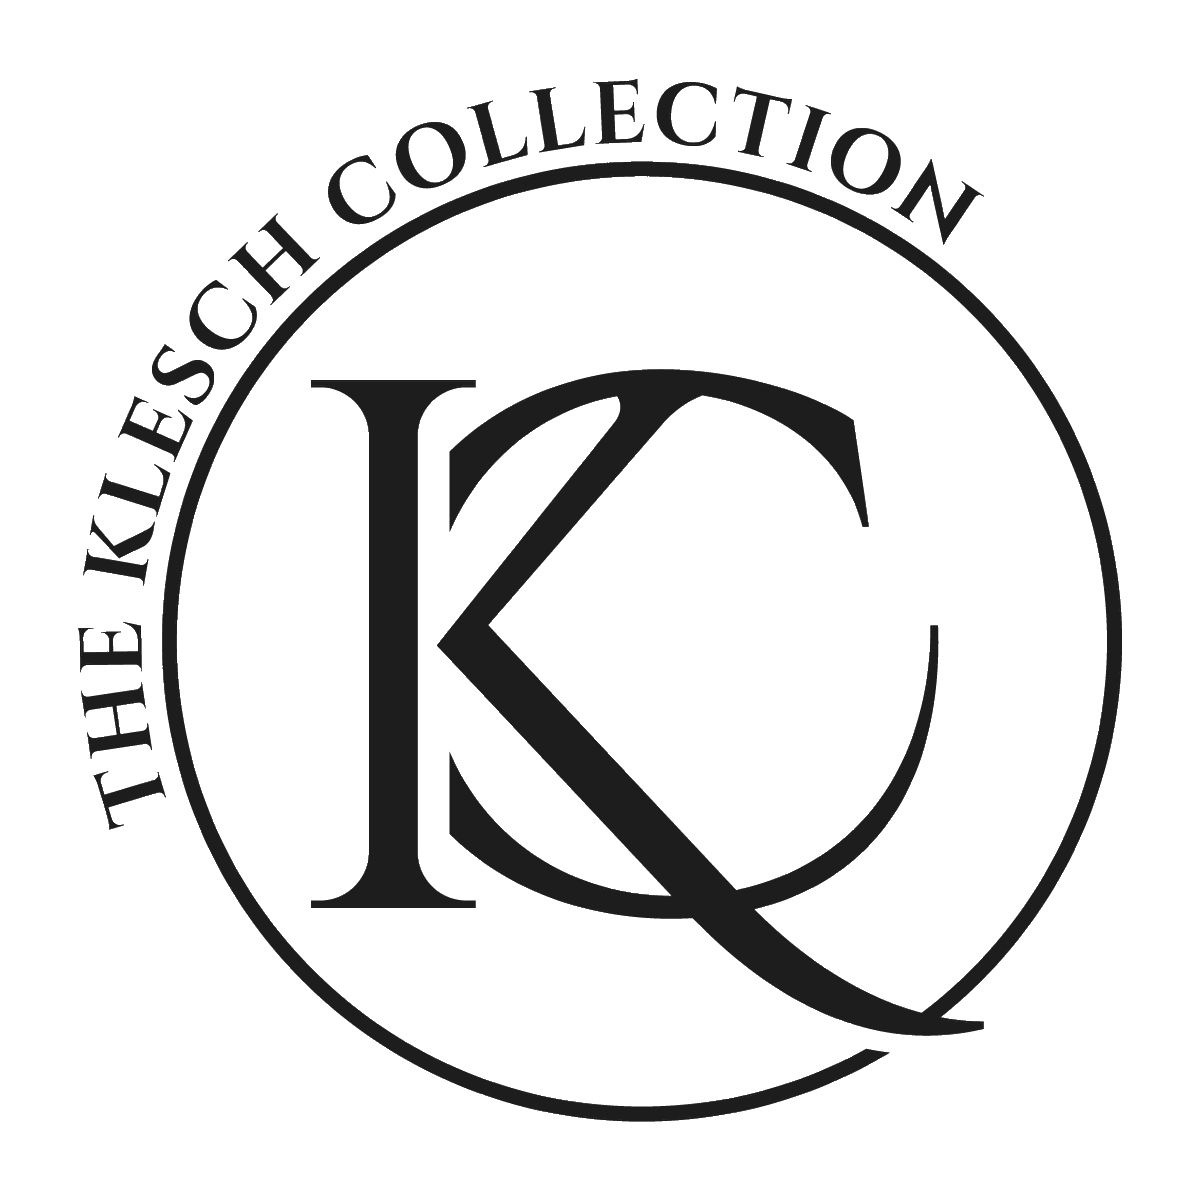 The Klesch Collection is offering a scholarship for Graduate Studies in Baroque and Renaissance painting! Graduate students should apply by June 20: ow.ly/SAzN50Rh5S9 #RenTwitter #earlymodern #RenaissancePainting #twitterstorians #BaroqueArt